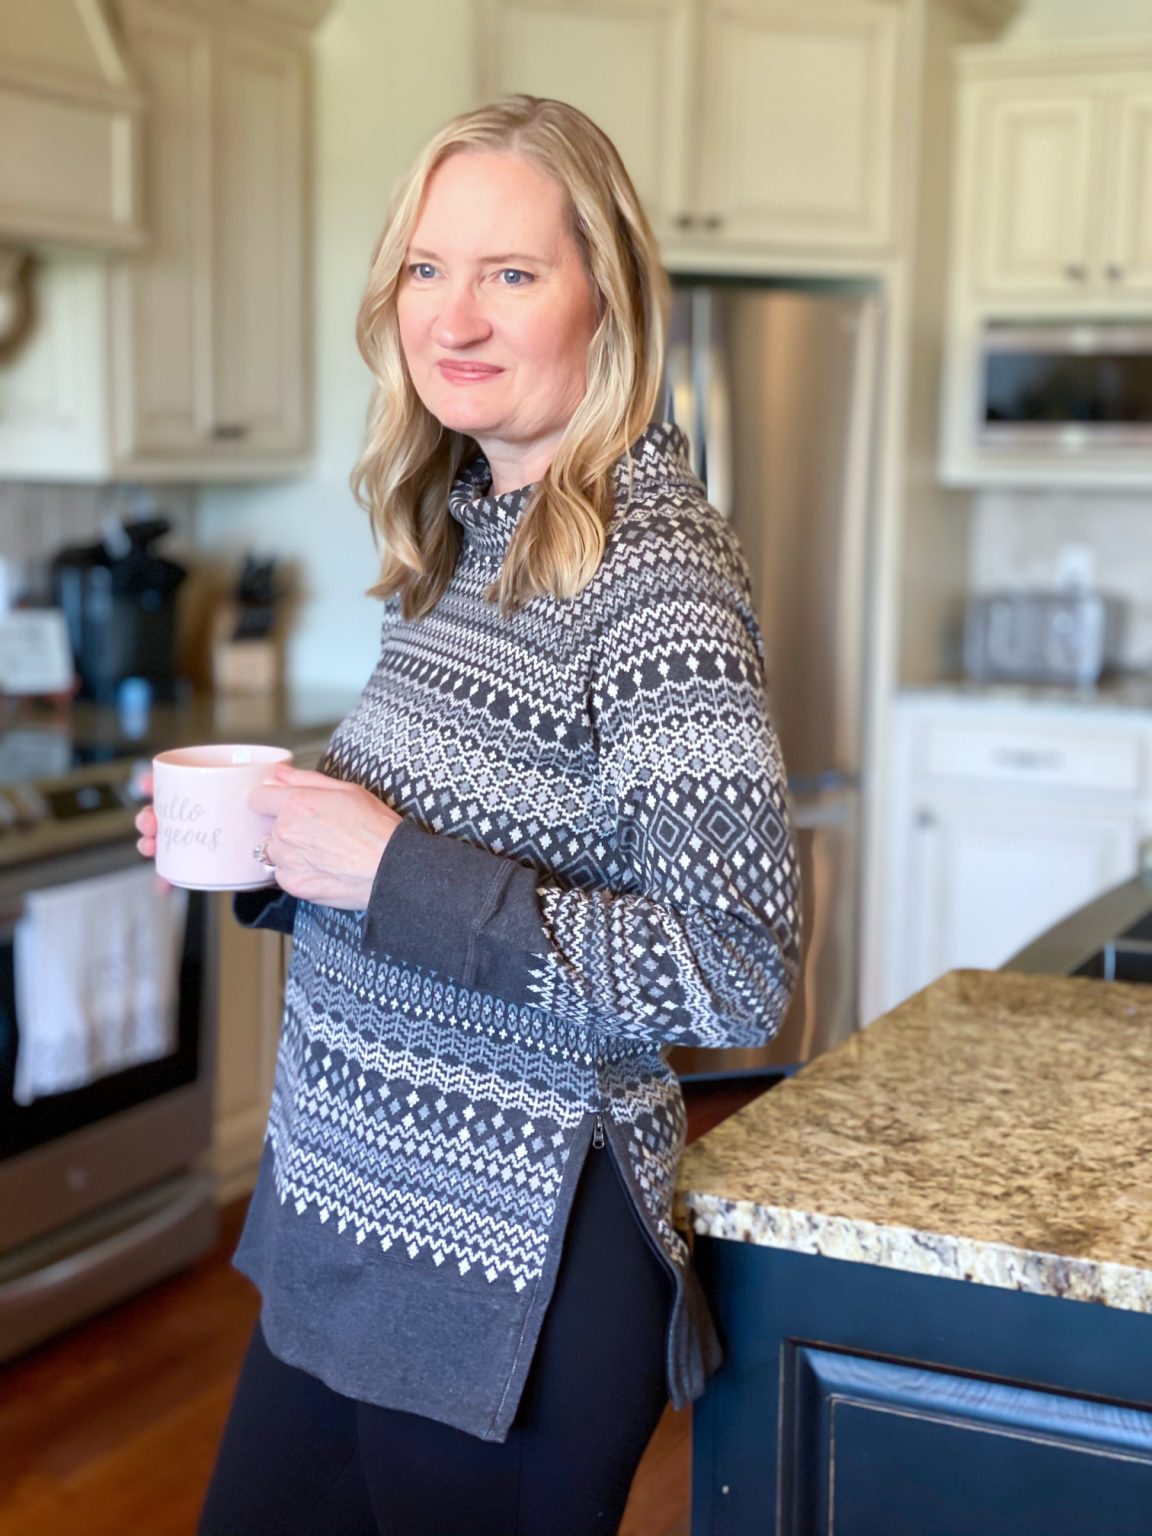 A Cozy Work At Home Outfit from T By Talbots - Classy Yet Trendy